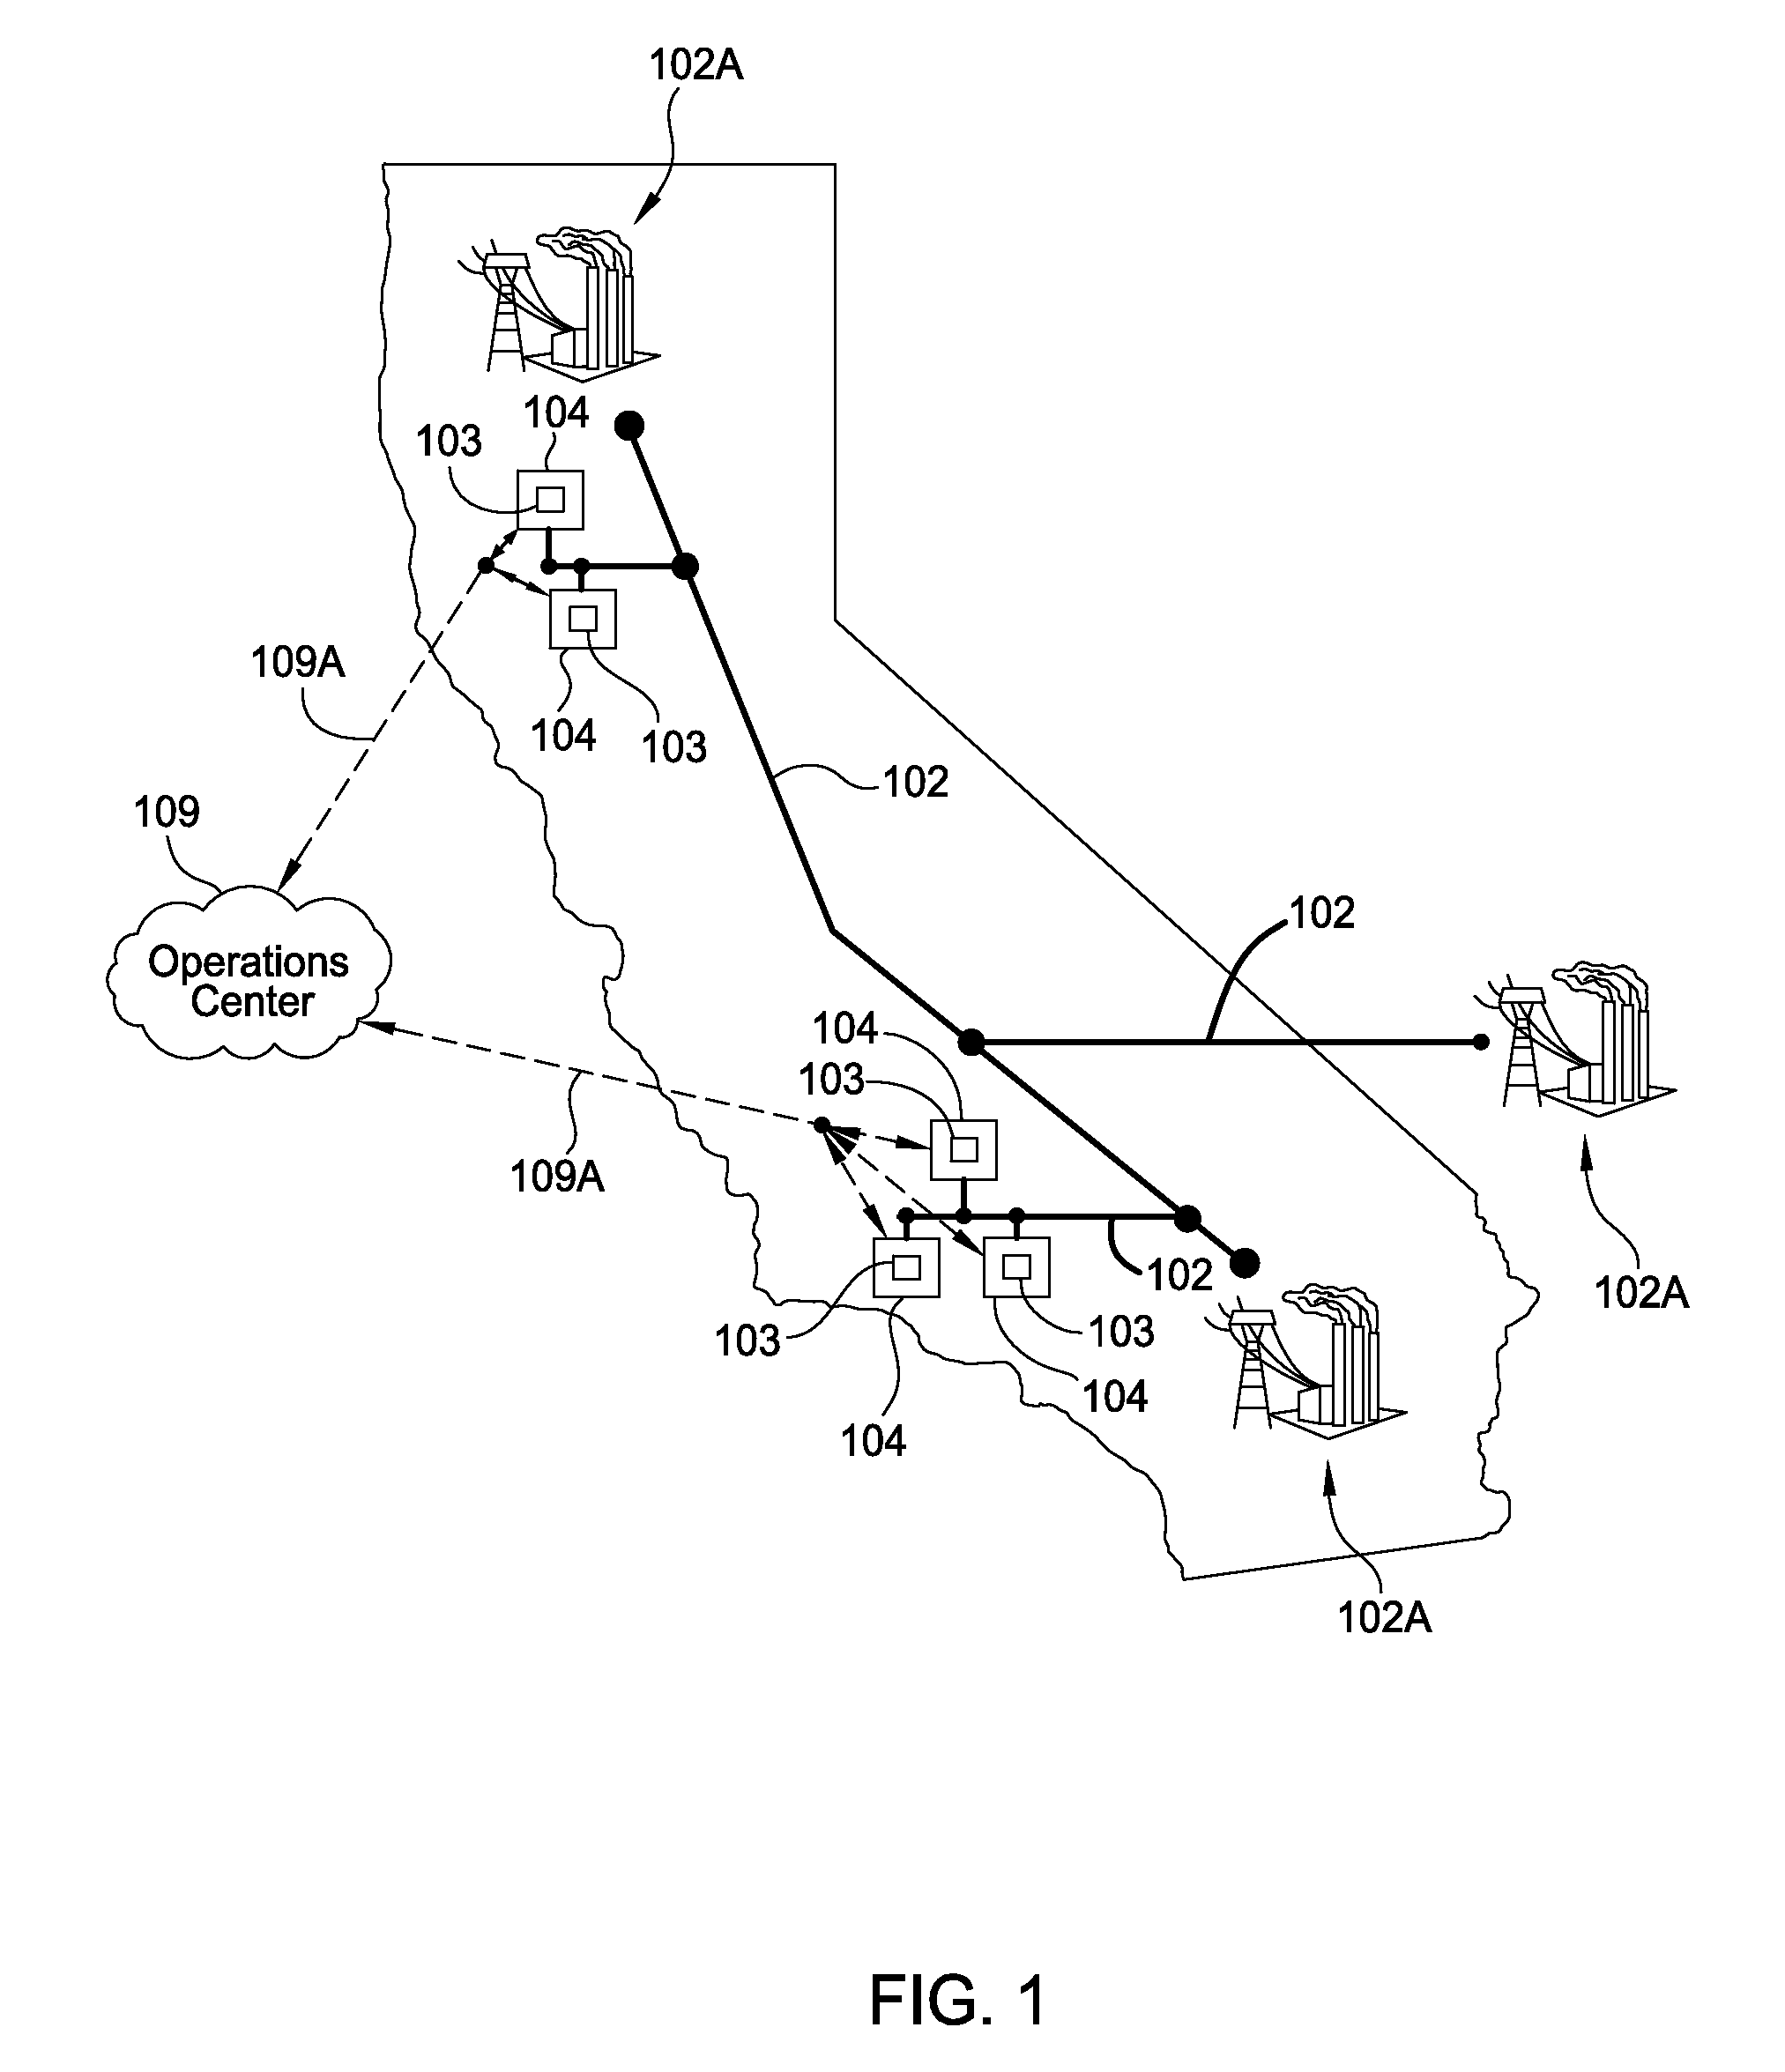 Method and apparatus for balancing power on a per phase basis in multi-phase electrical load facilities using an energy storage system